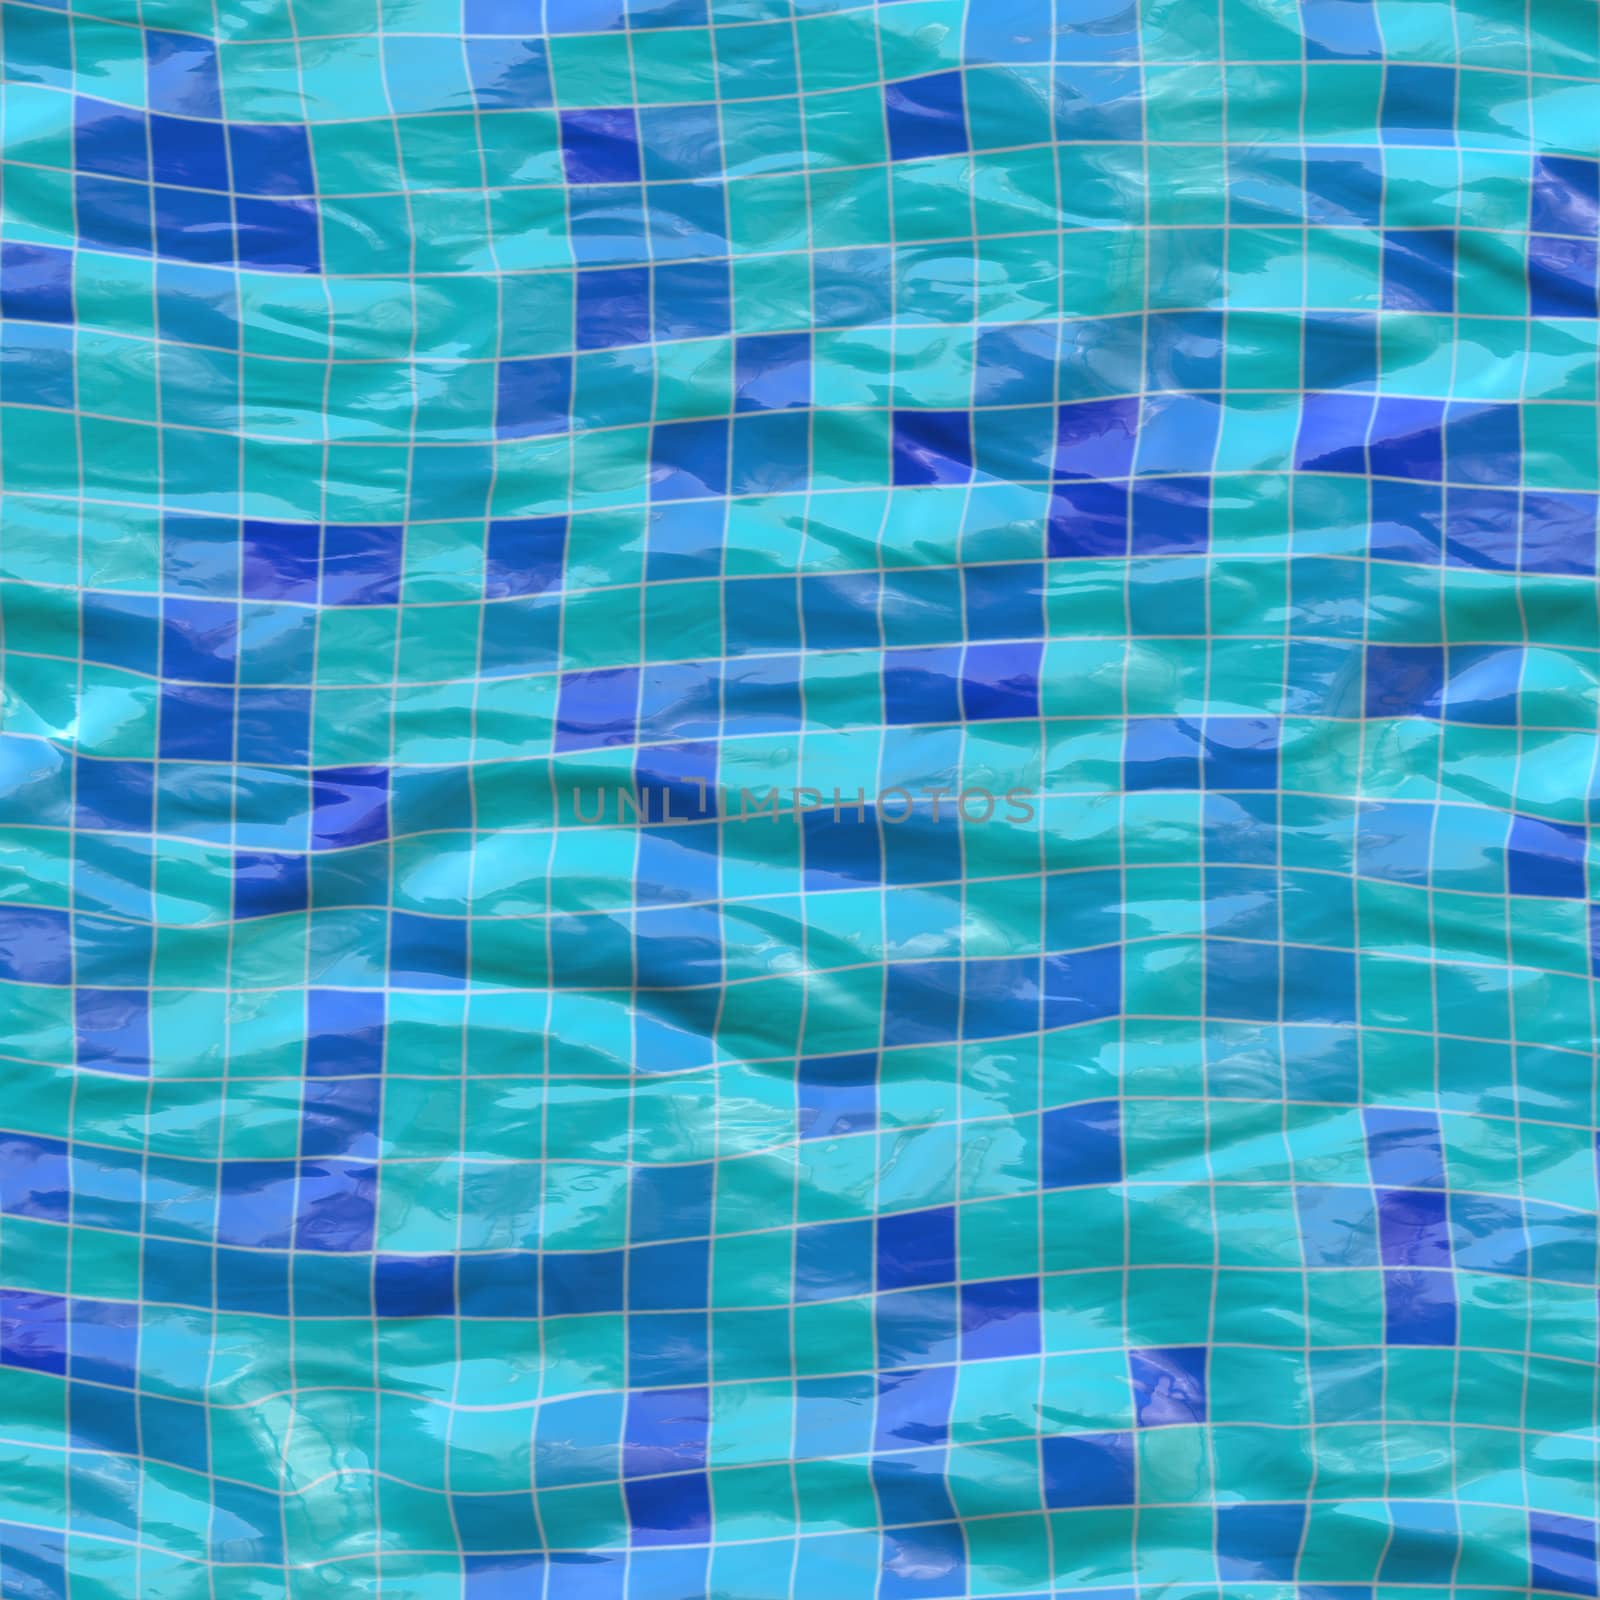 medium sized blue ceramic tiles submerged under water, seamlessly tillable